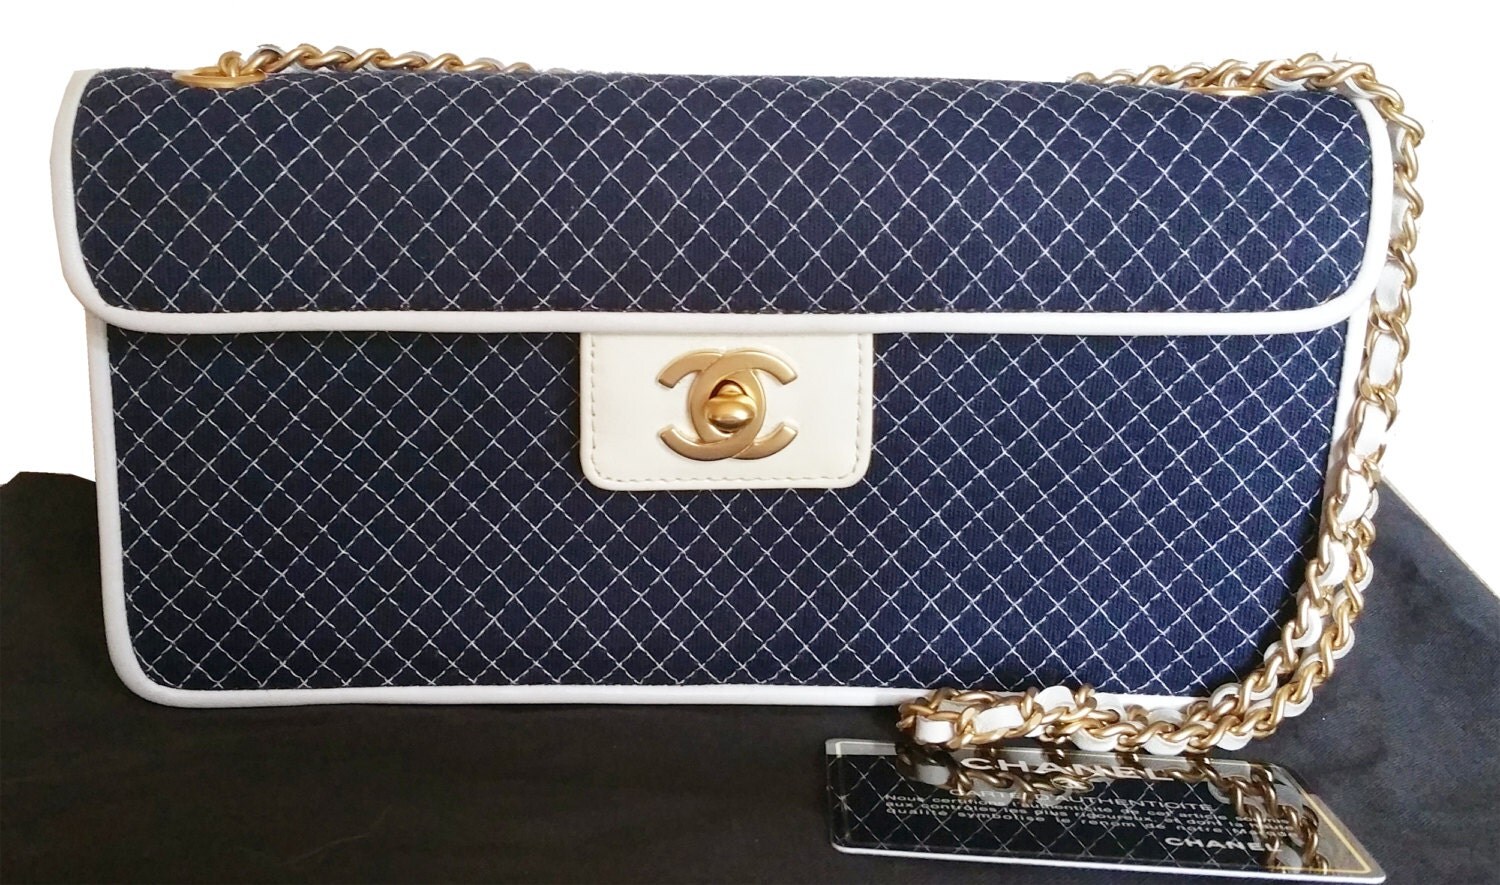 Authentic Chanel Nautical Fabric Leather trim by LARVintage